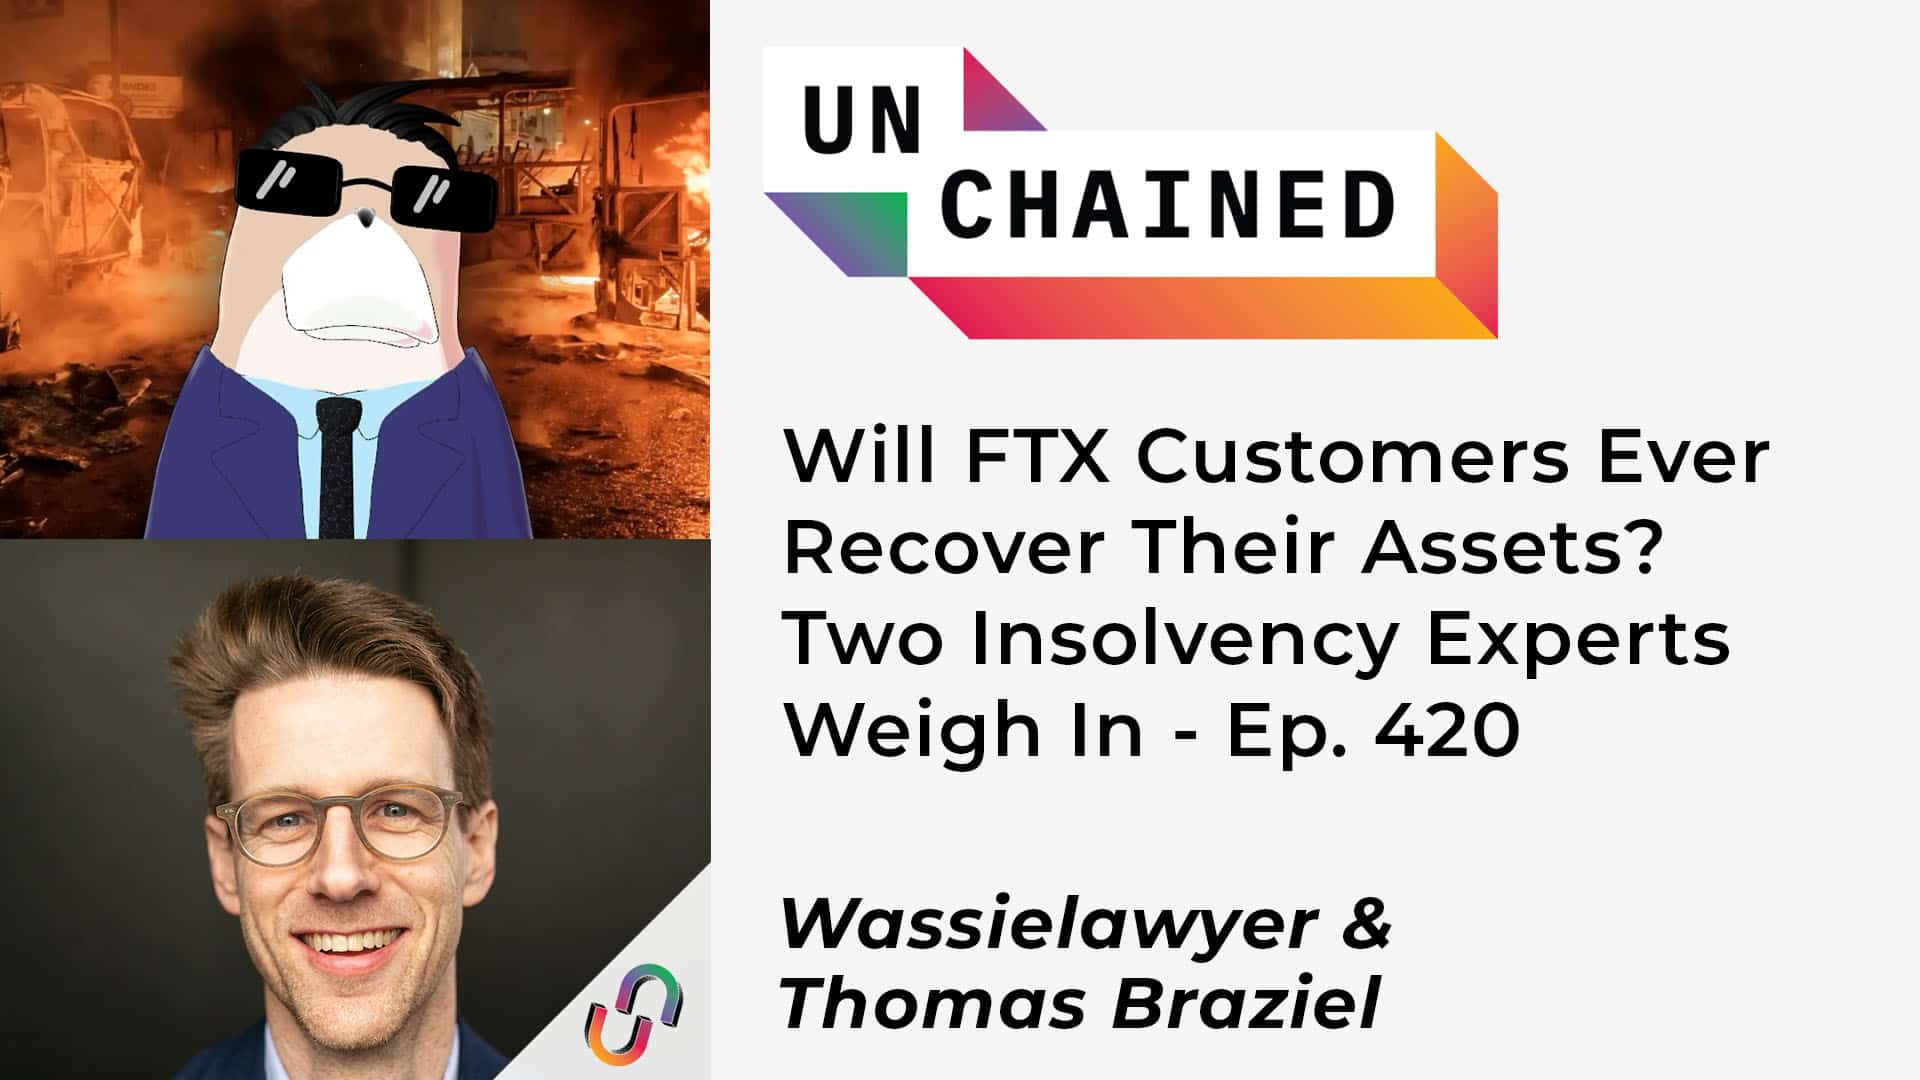 Will FTX Customers Ever Recover Their Assets? Two Insolvency Experts Weigh In - Ep. 420